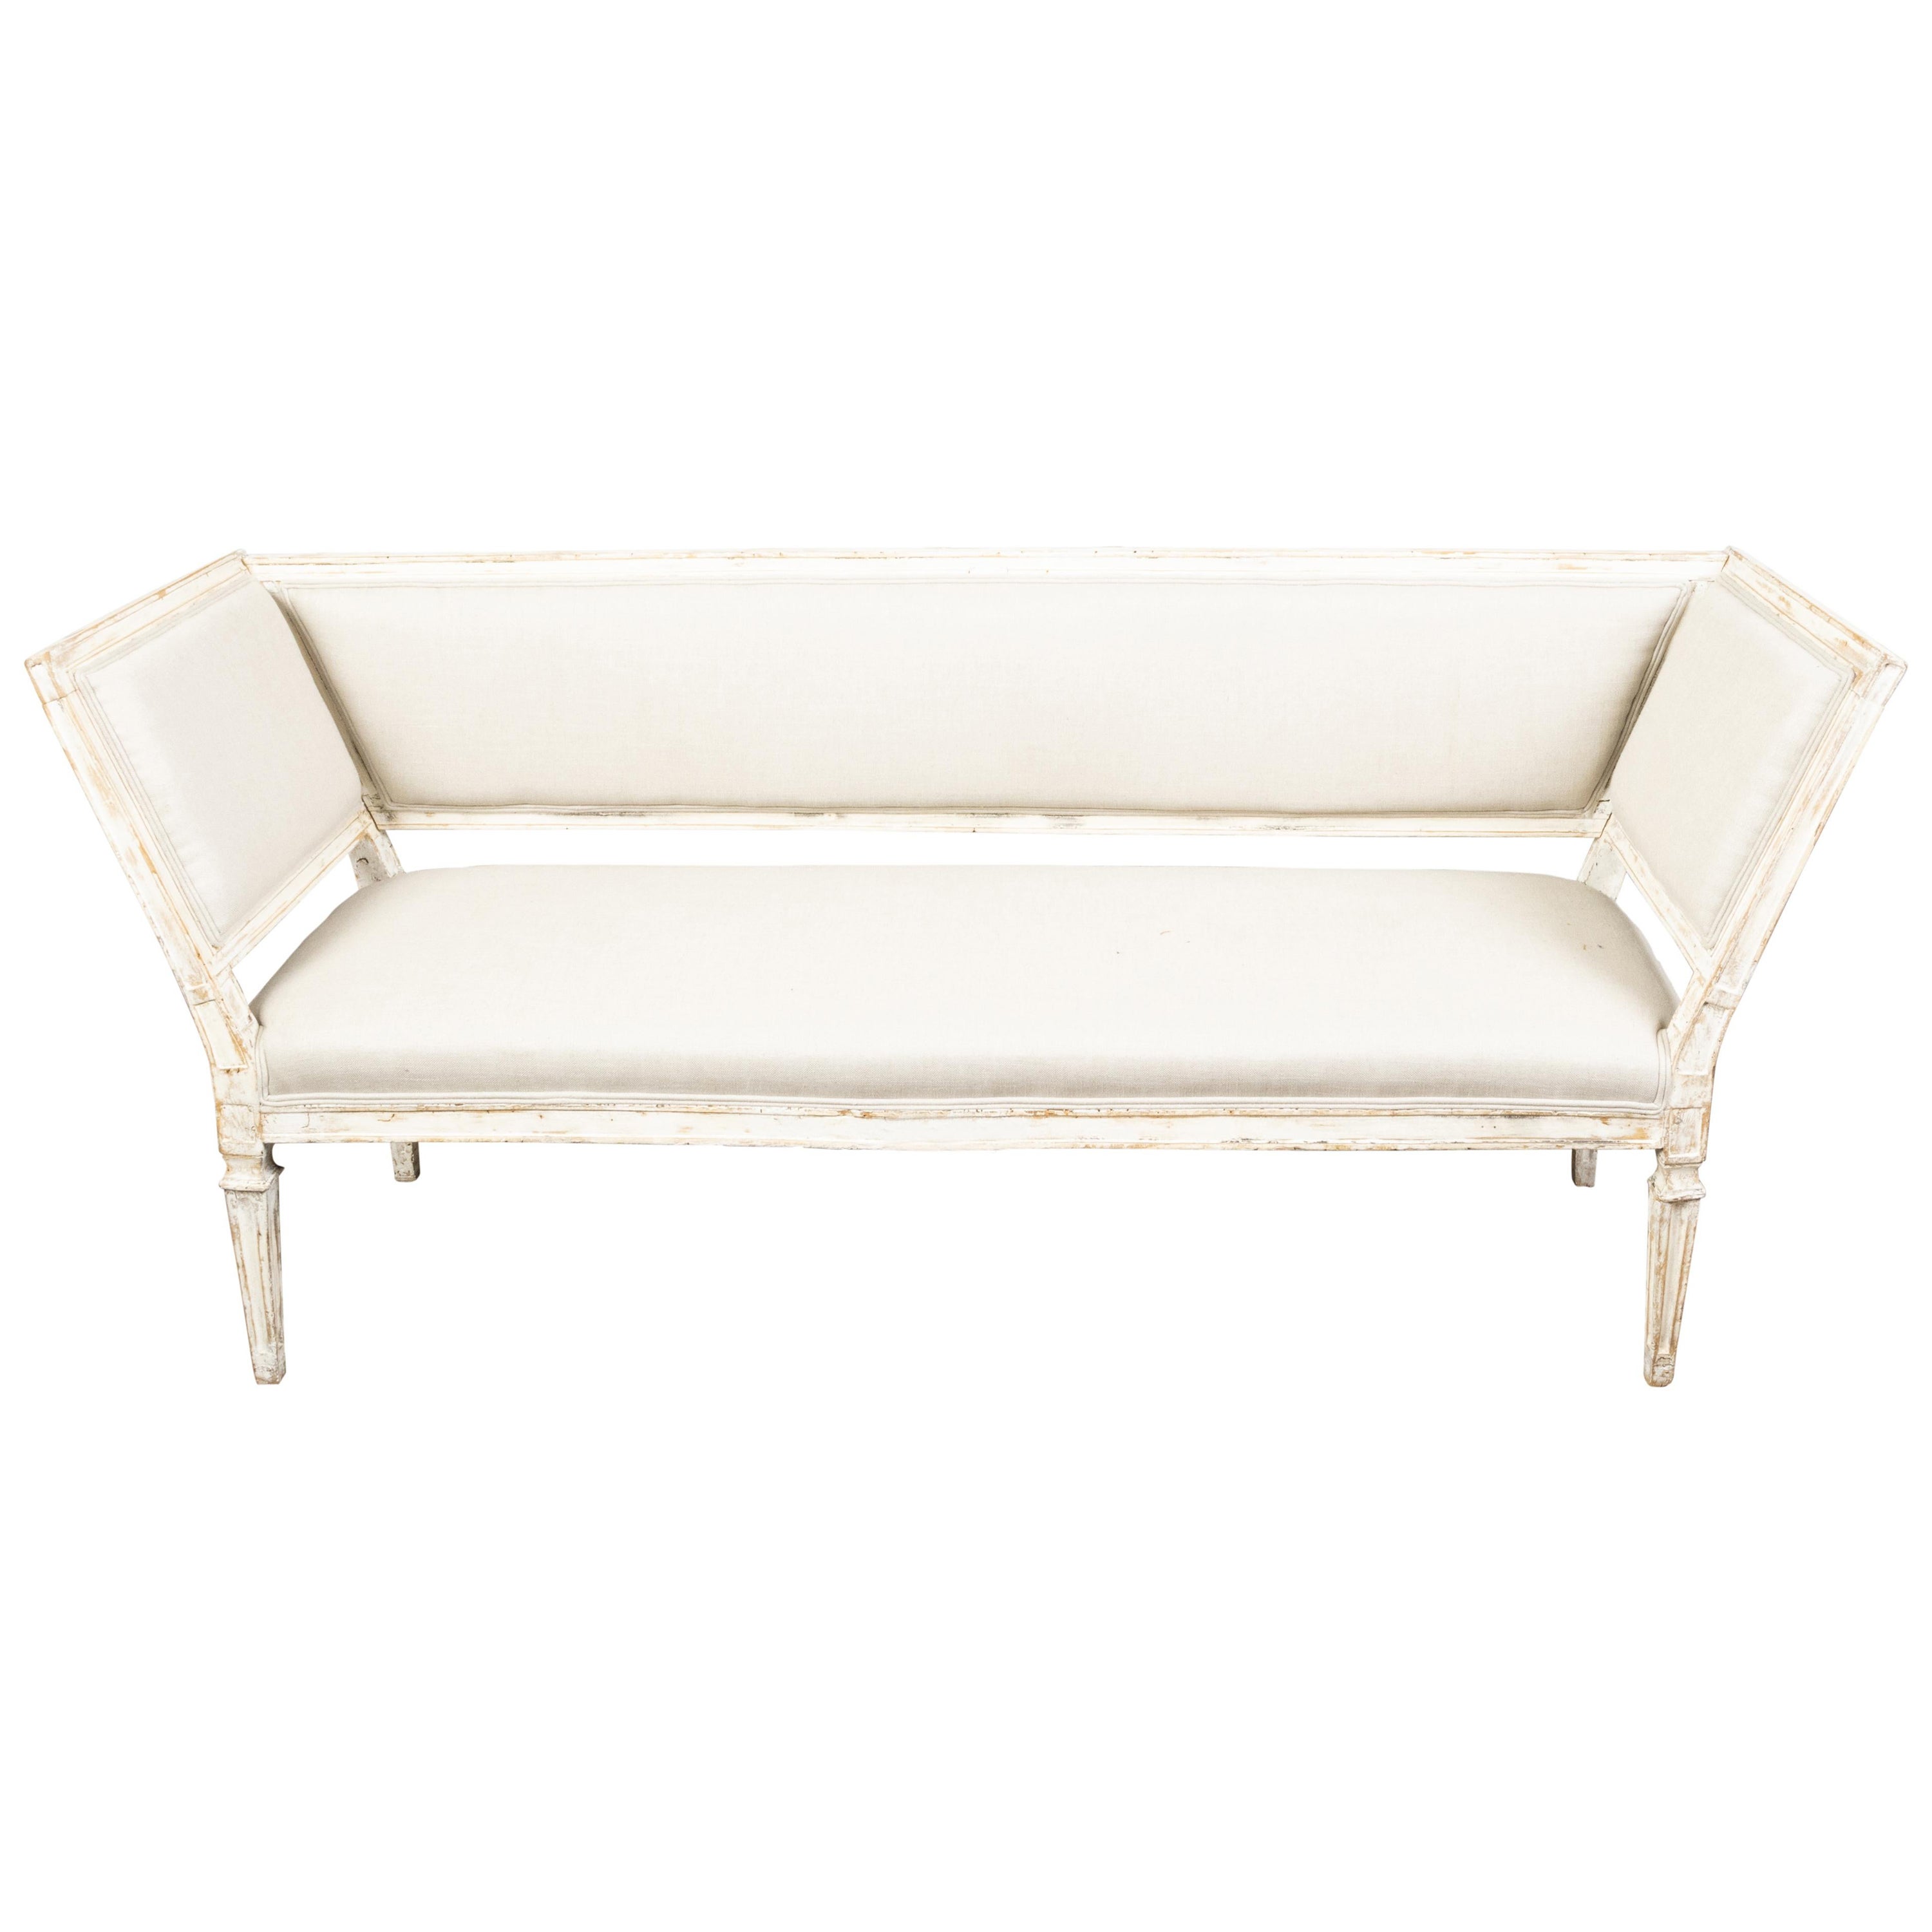 Italian 19th Century White Painted Sofa with Slanted Sides and Distressed Patina